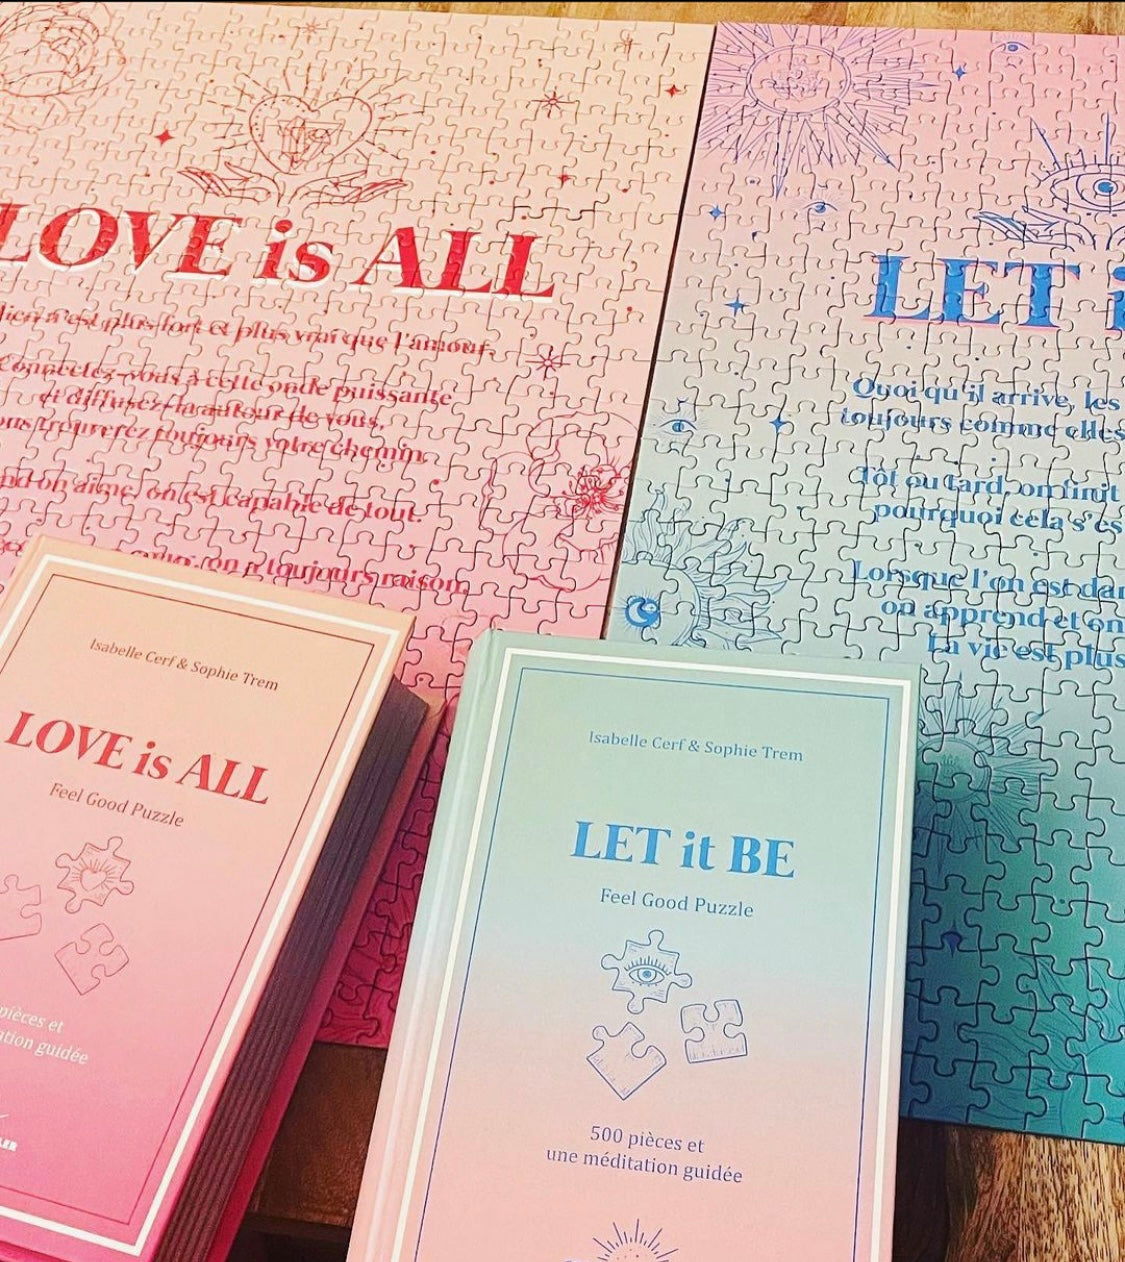 Puzzle Feel Good : Love is all